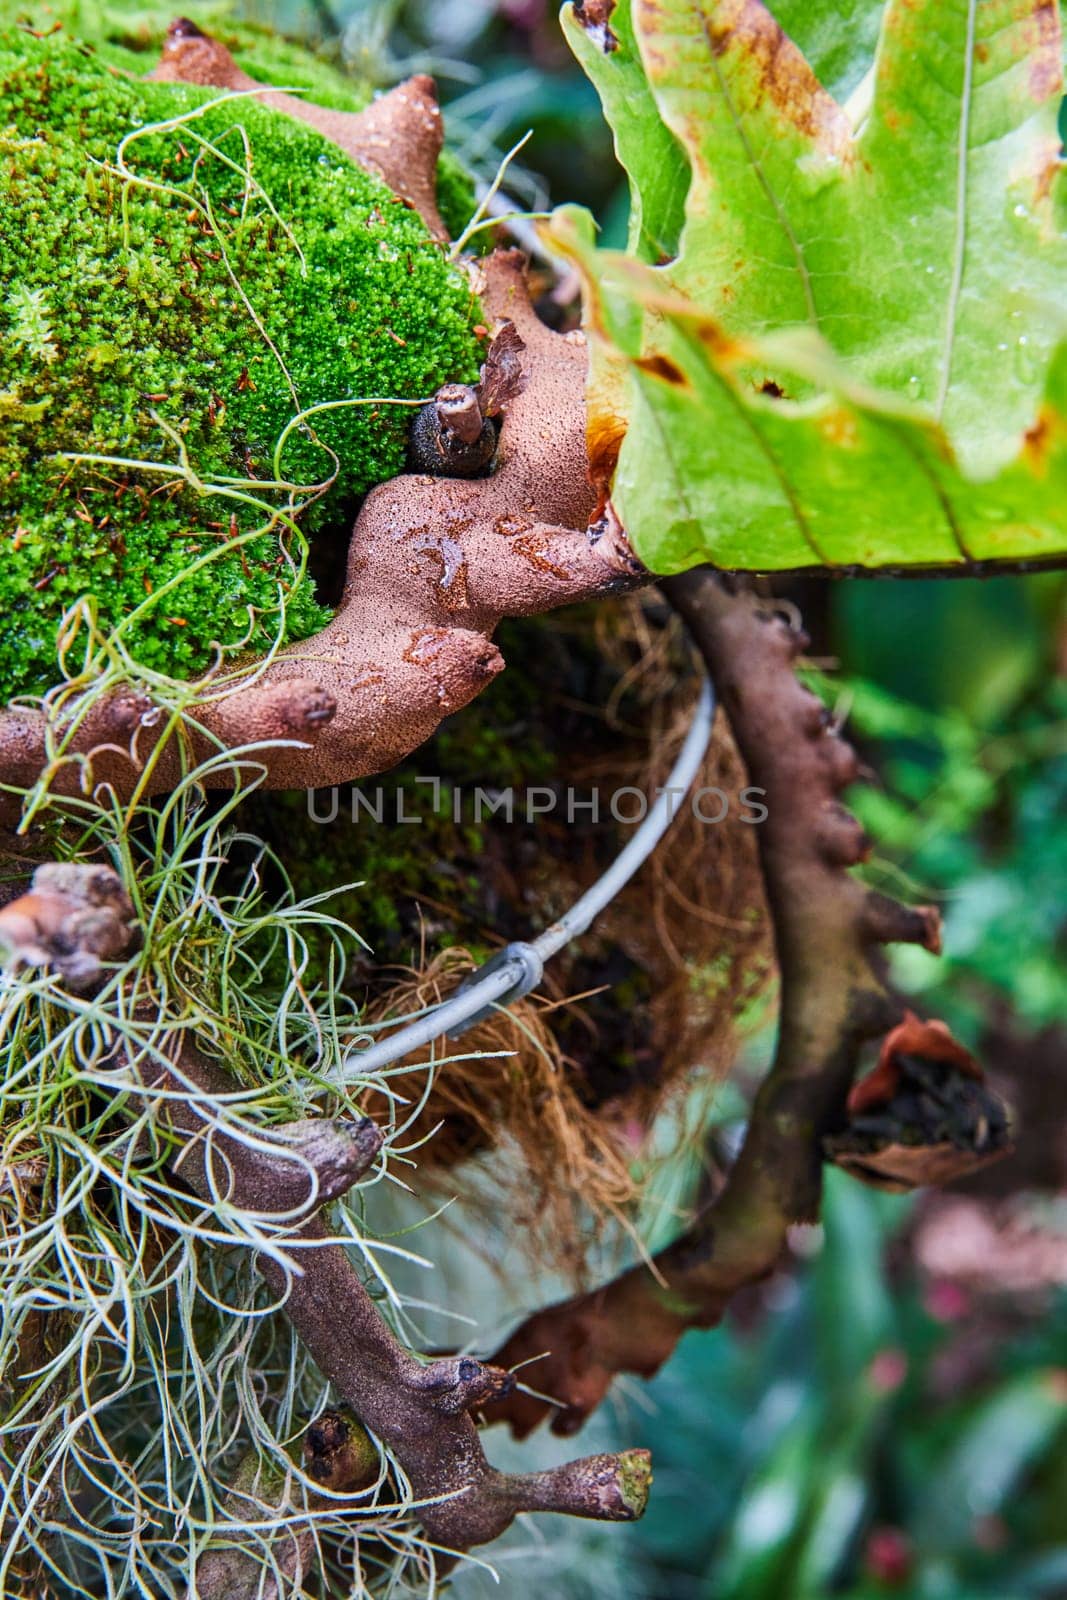 Close-up of lush green moss and air plants on decaying wood, showcasing nature's life cycle, taken at a conservatory in Muncie, Indiana in 2023